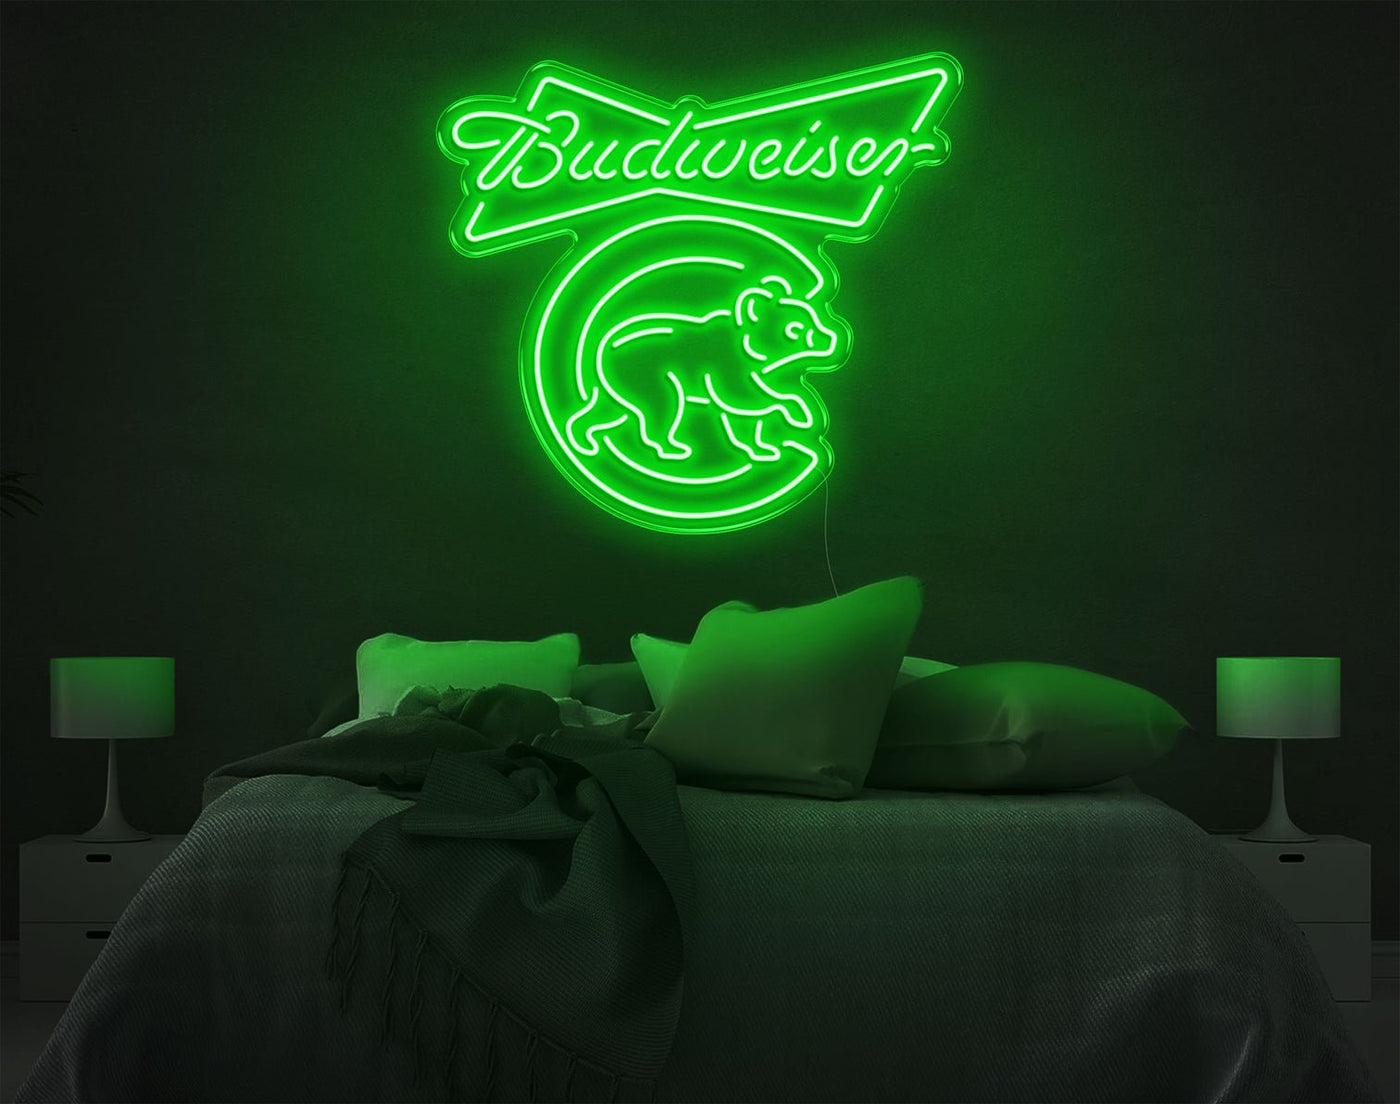 Budweiser LED Neon Sign - 25inch x 28inchGreen